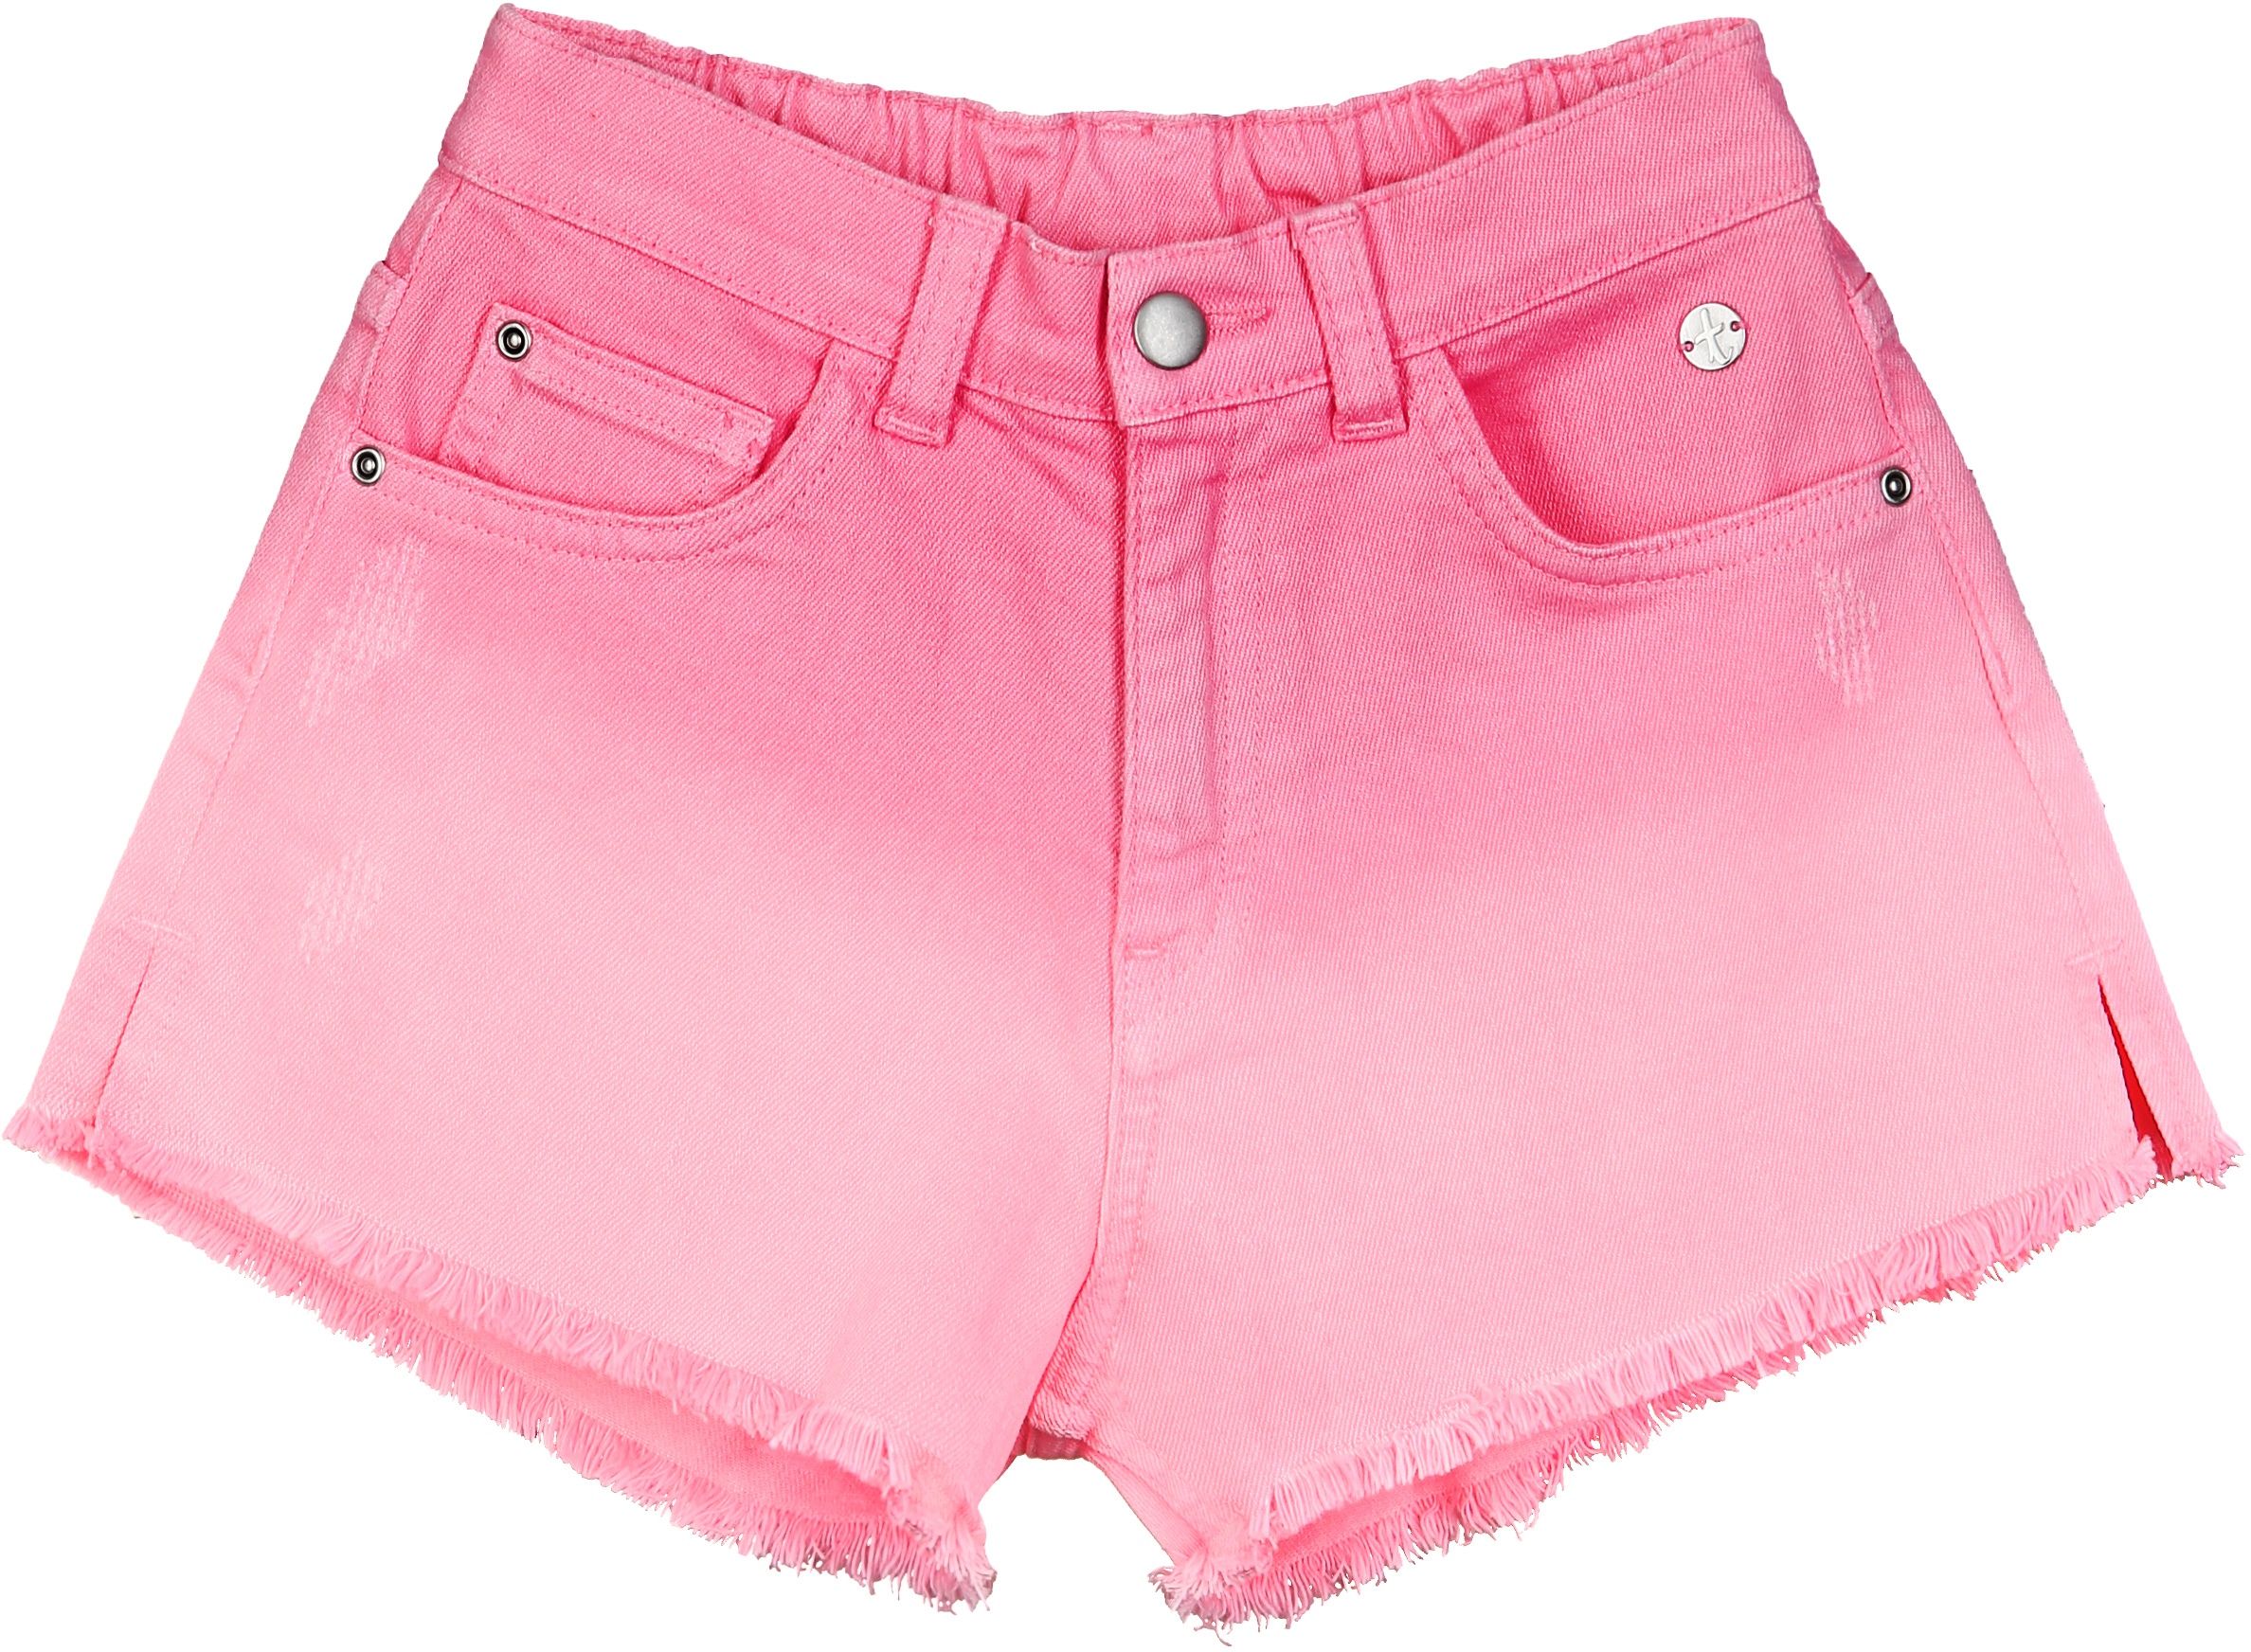 tausendkind collection - Jeans-Shorts SONNENAUFGANG in rosa, Gr.134